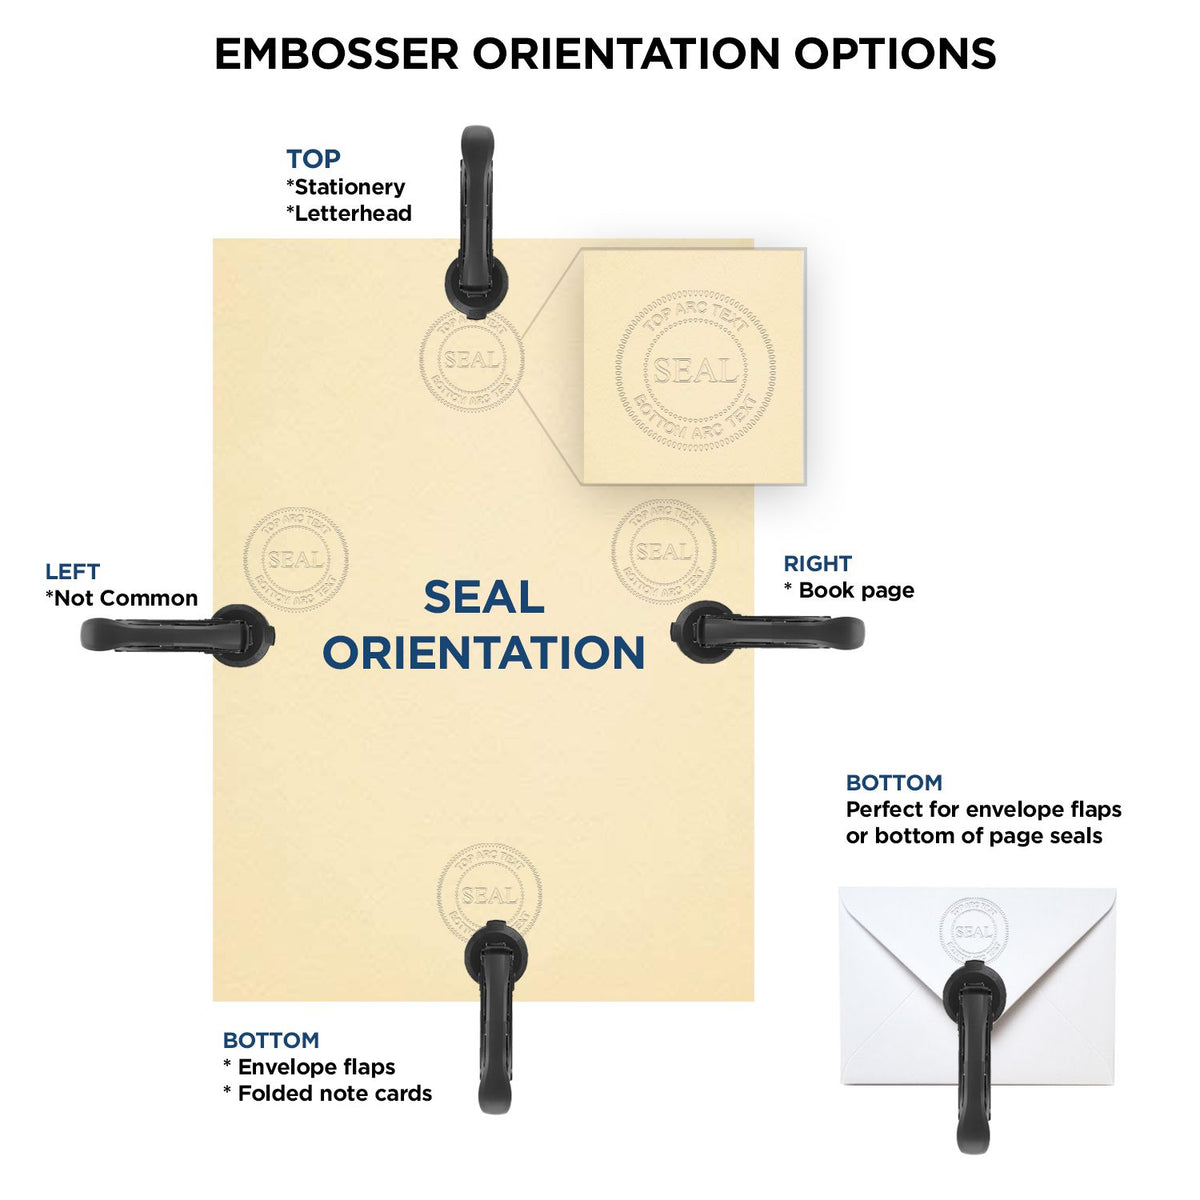 An infographic for the Handheld Oregon Professional Geologist Embosser showing embosser orientation, this is showing examples of a top, bottom, right and left insert.